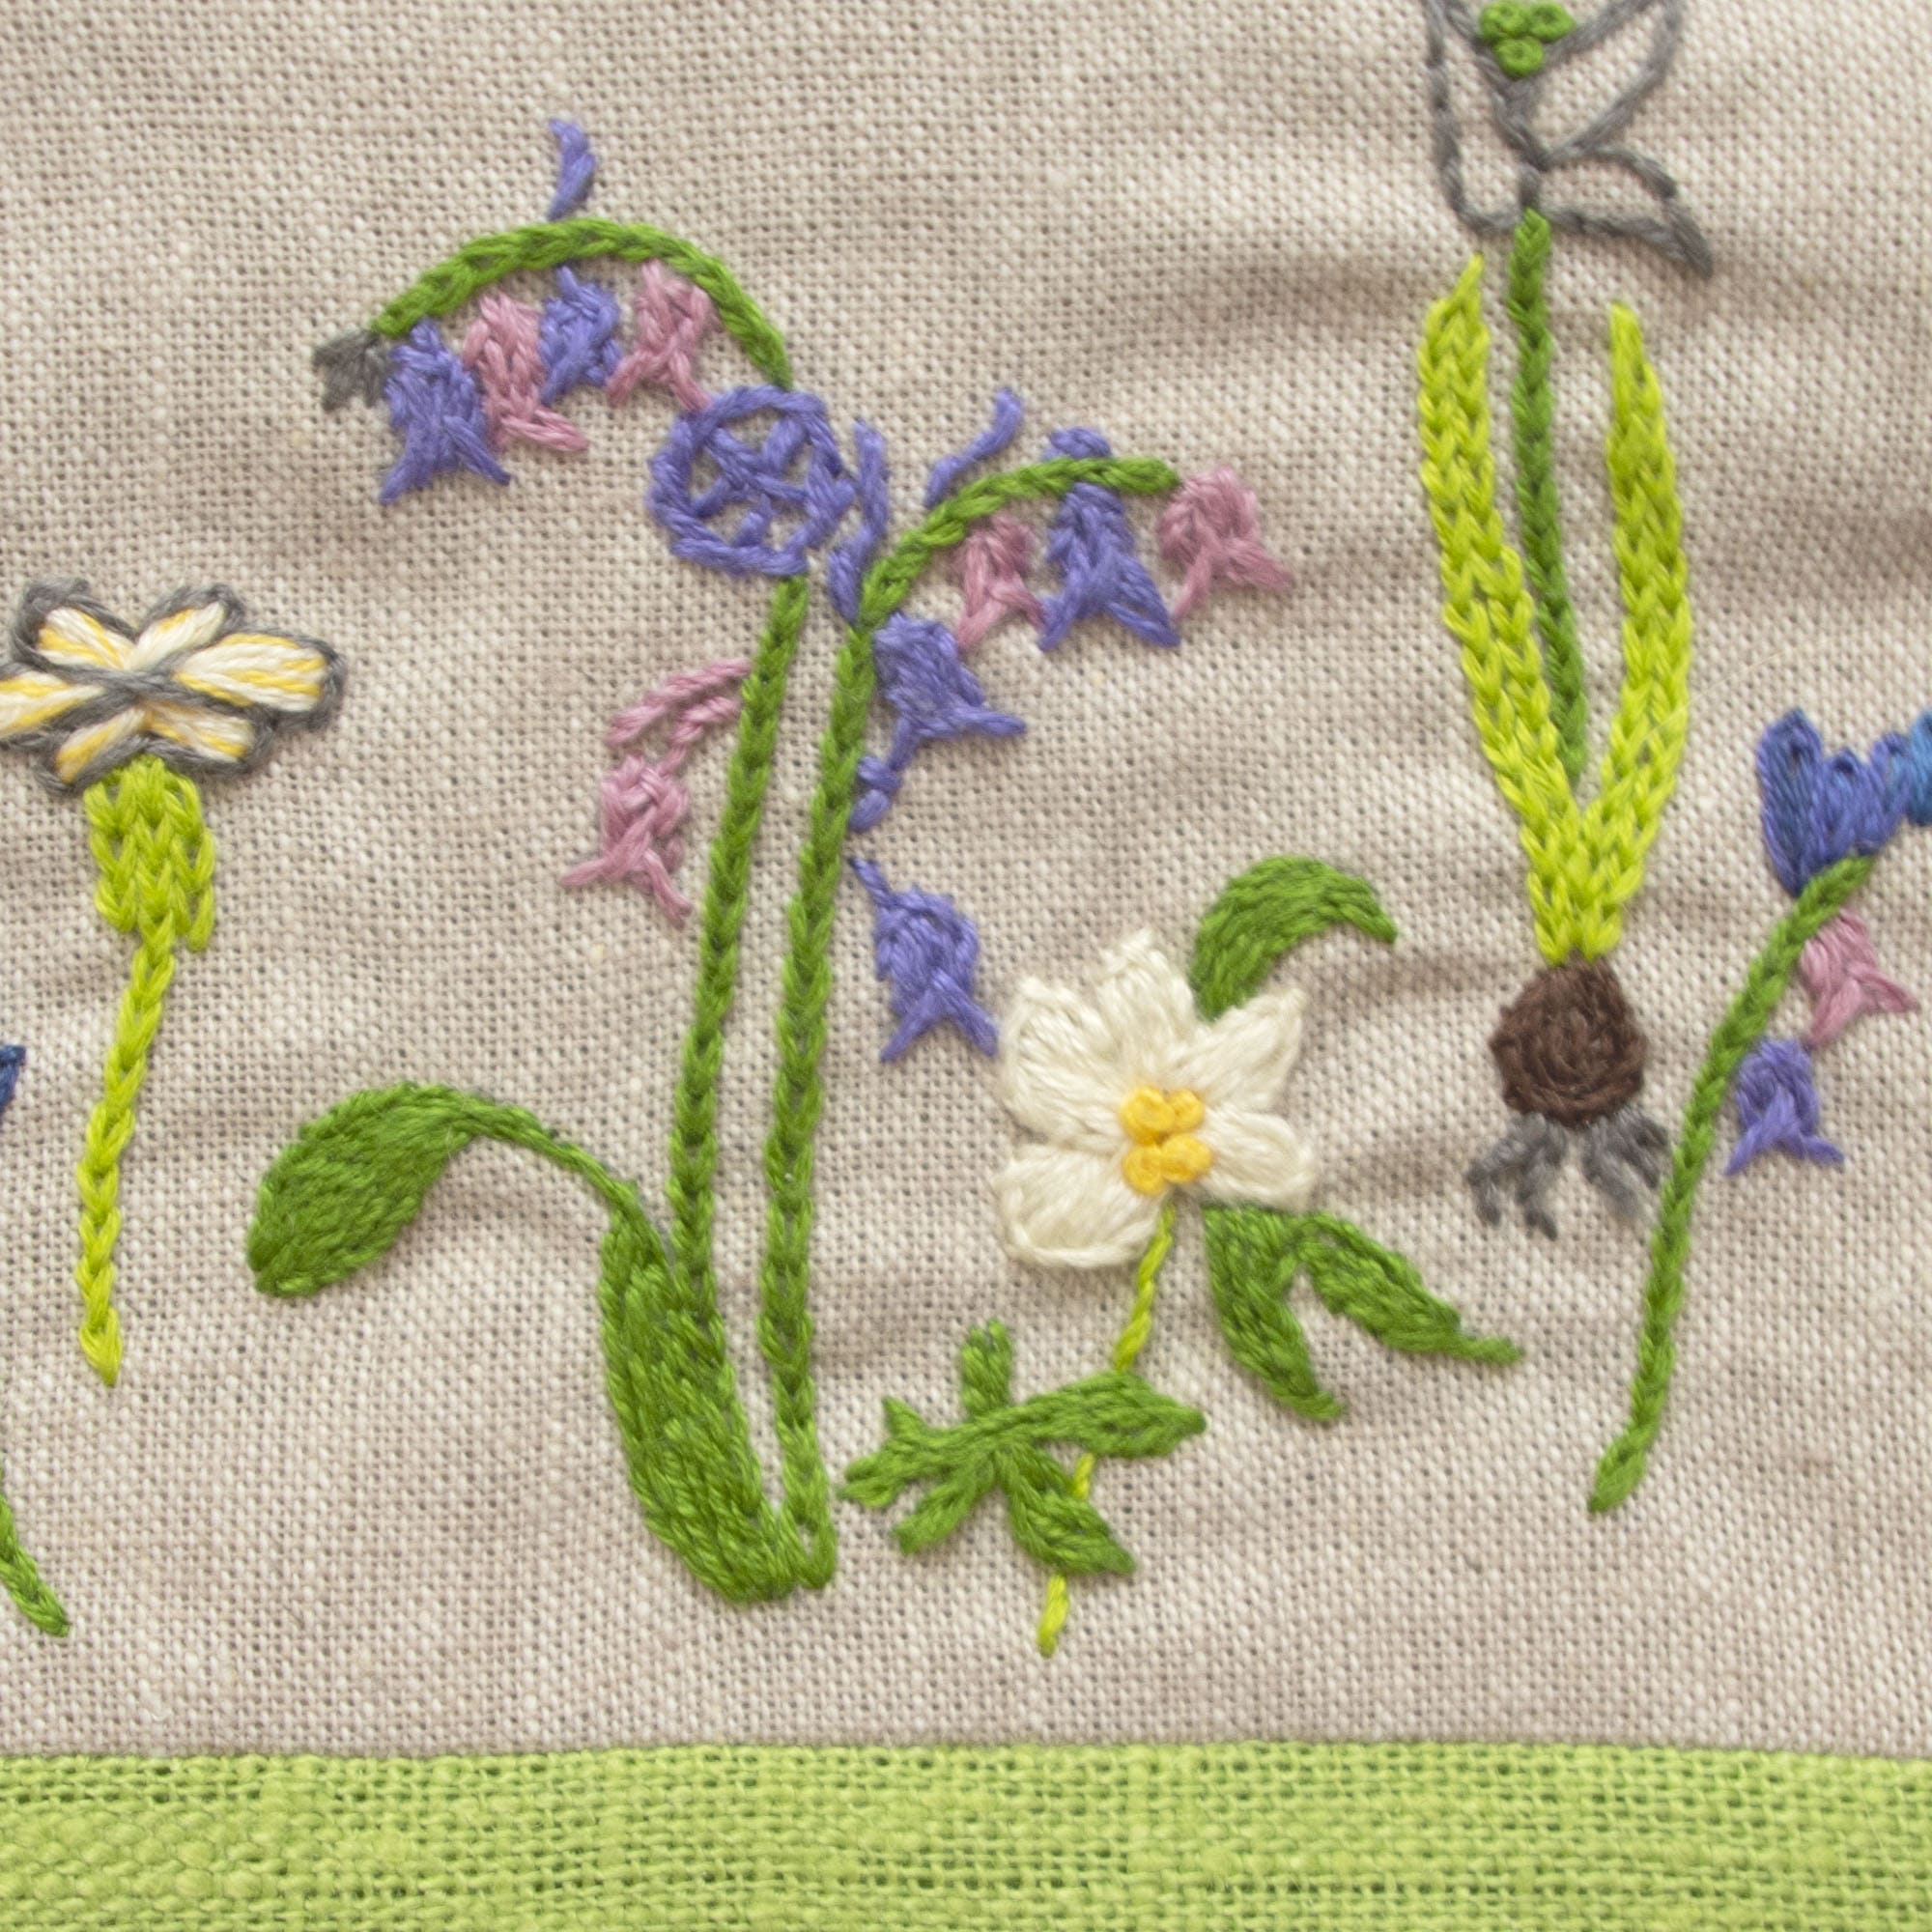 Fine Cell Work Hand-Embroidered Plantlife Linen Purse Floral Insects Green Grey Purple Handmade in Prison